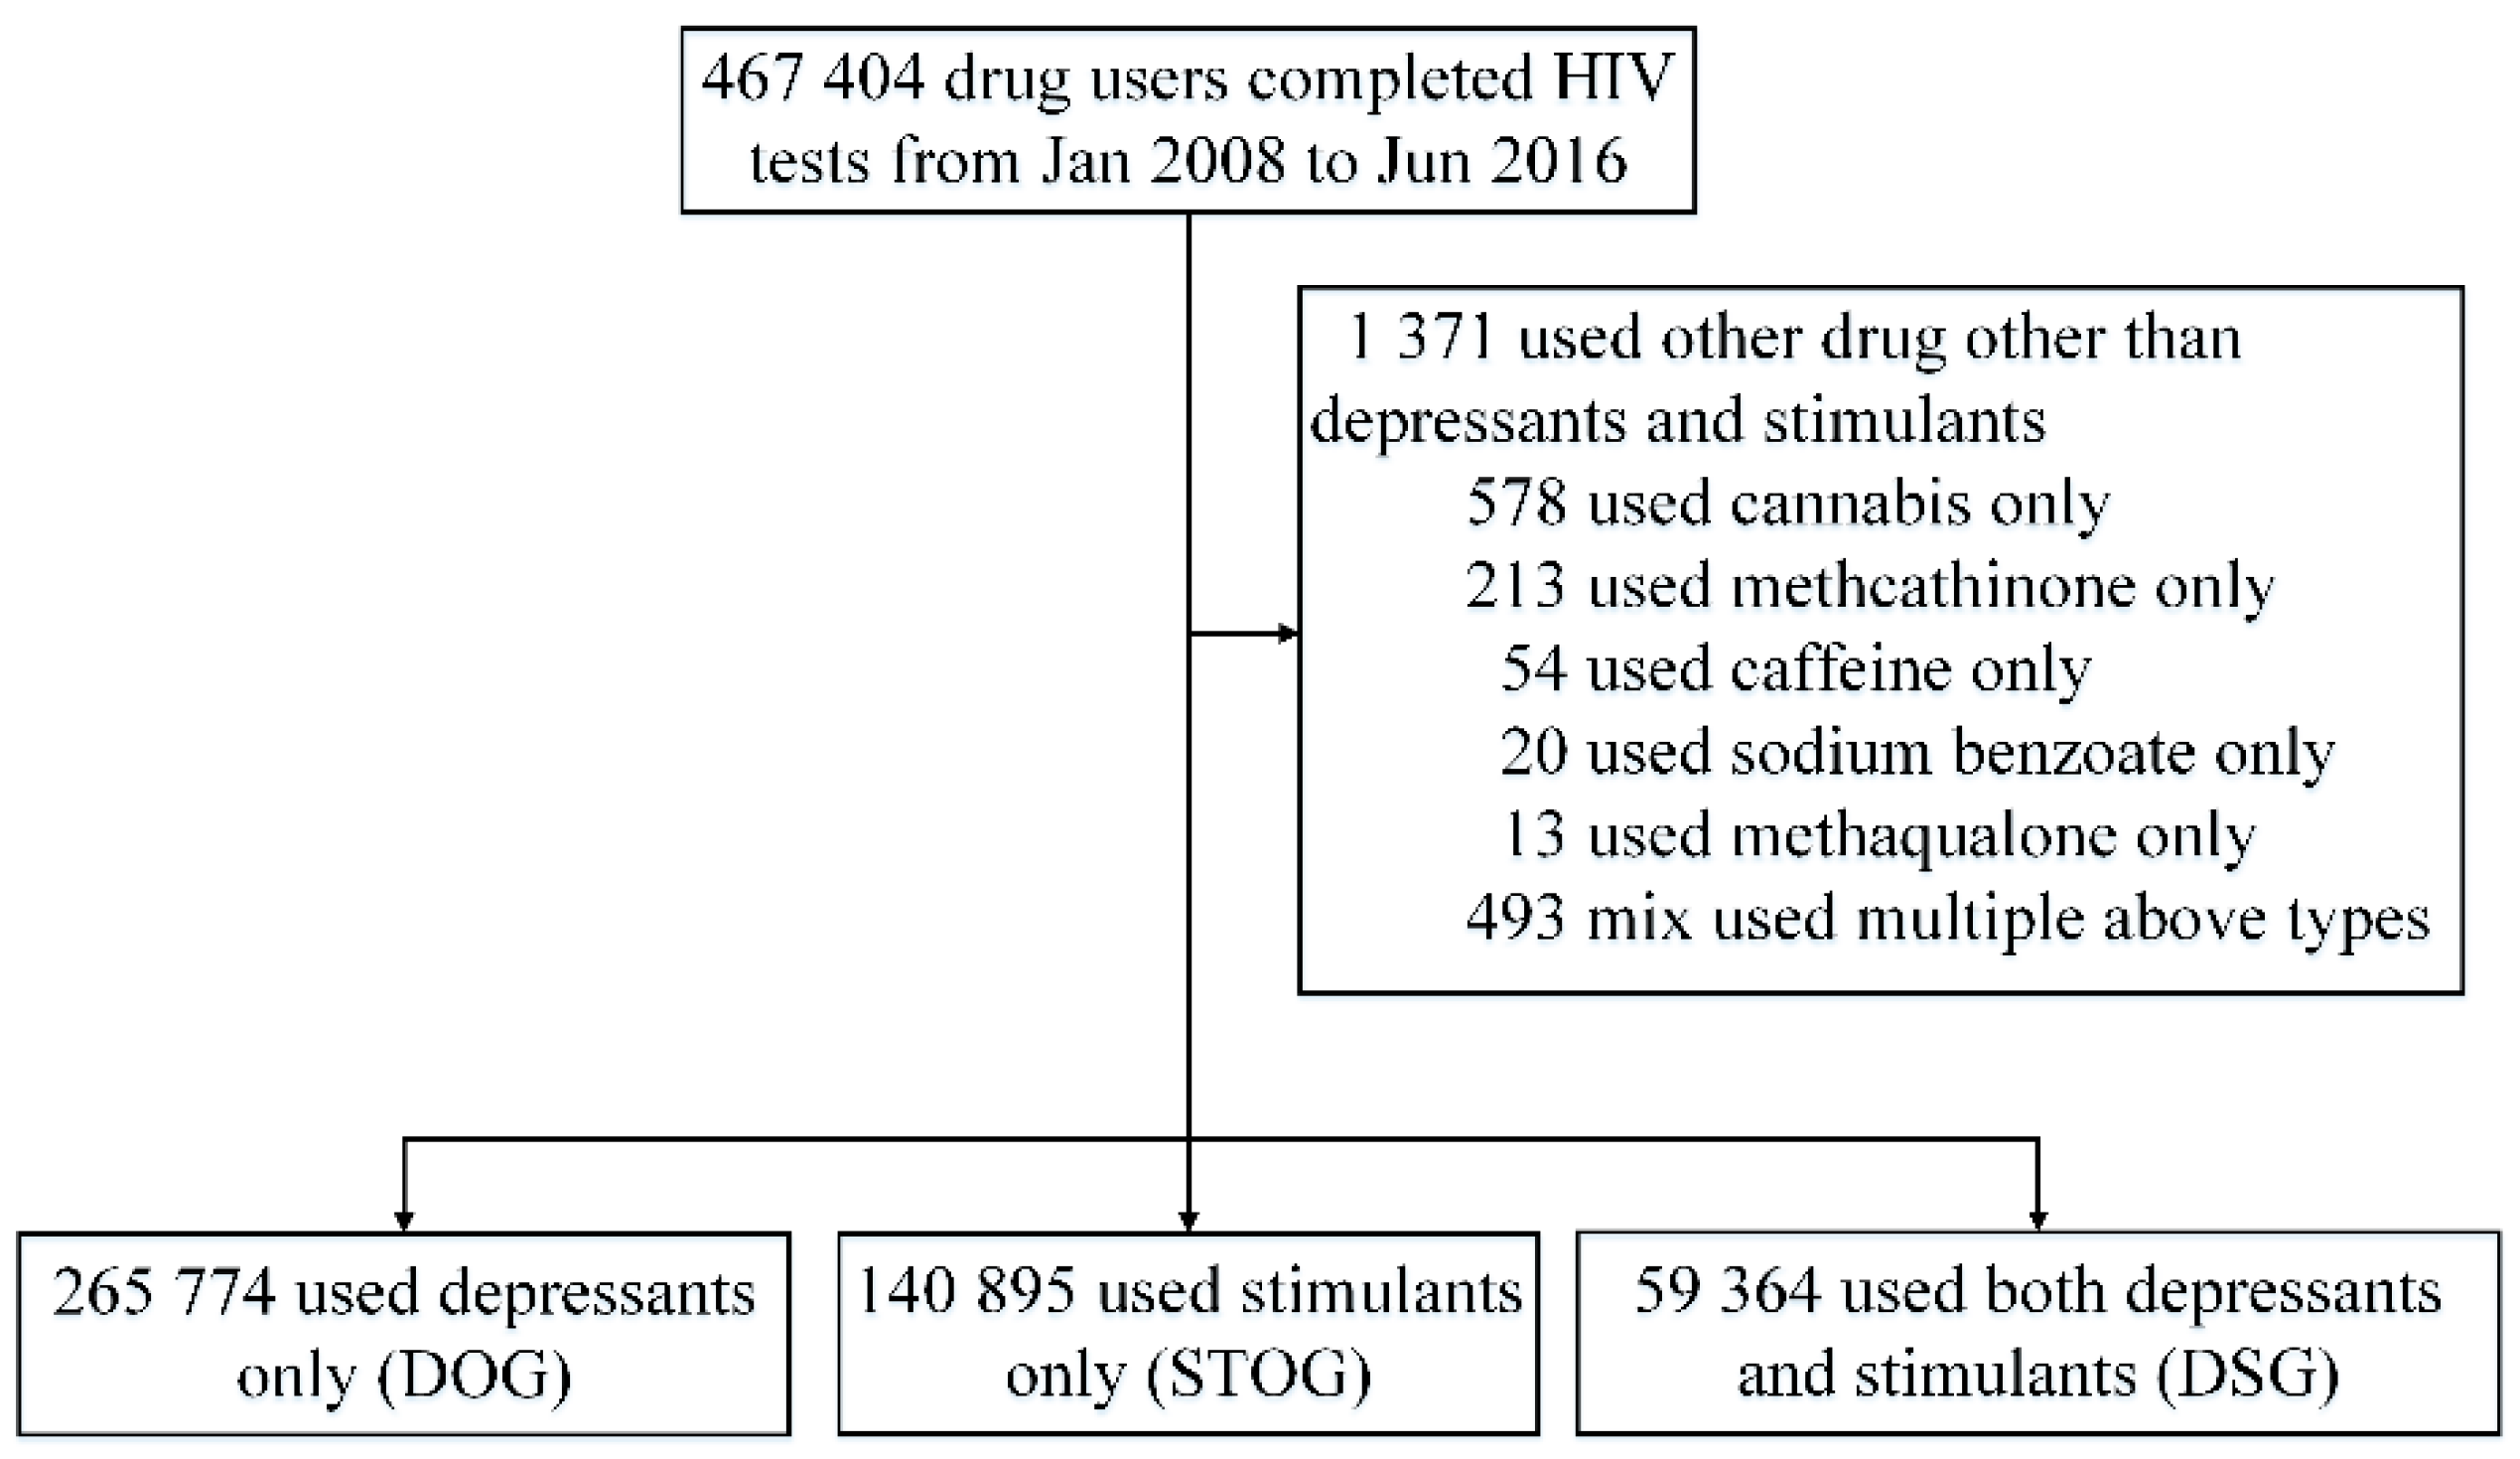 IJERPH | Free Full-Text | Epidemics of HIV Infection among Heavy Drug Users  of Depressants Only, Stimulants Only, and Both Depressants and Stimulants  in Mainland China: A Series, Cross-Sectional Studies | HTML